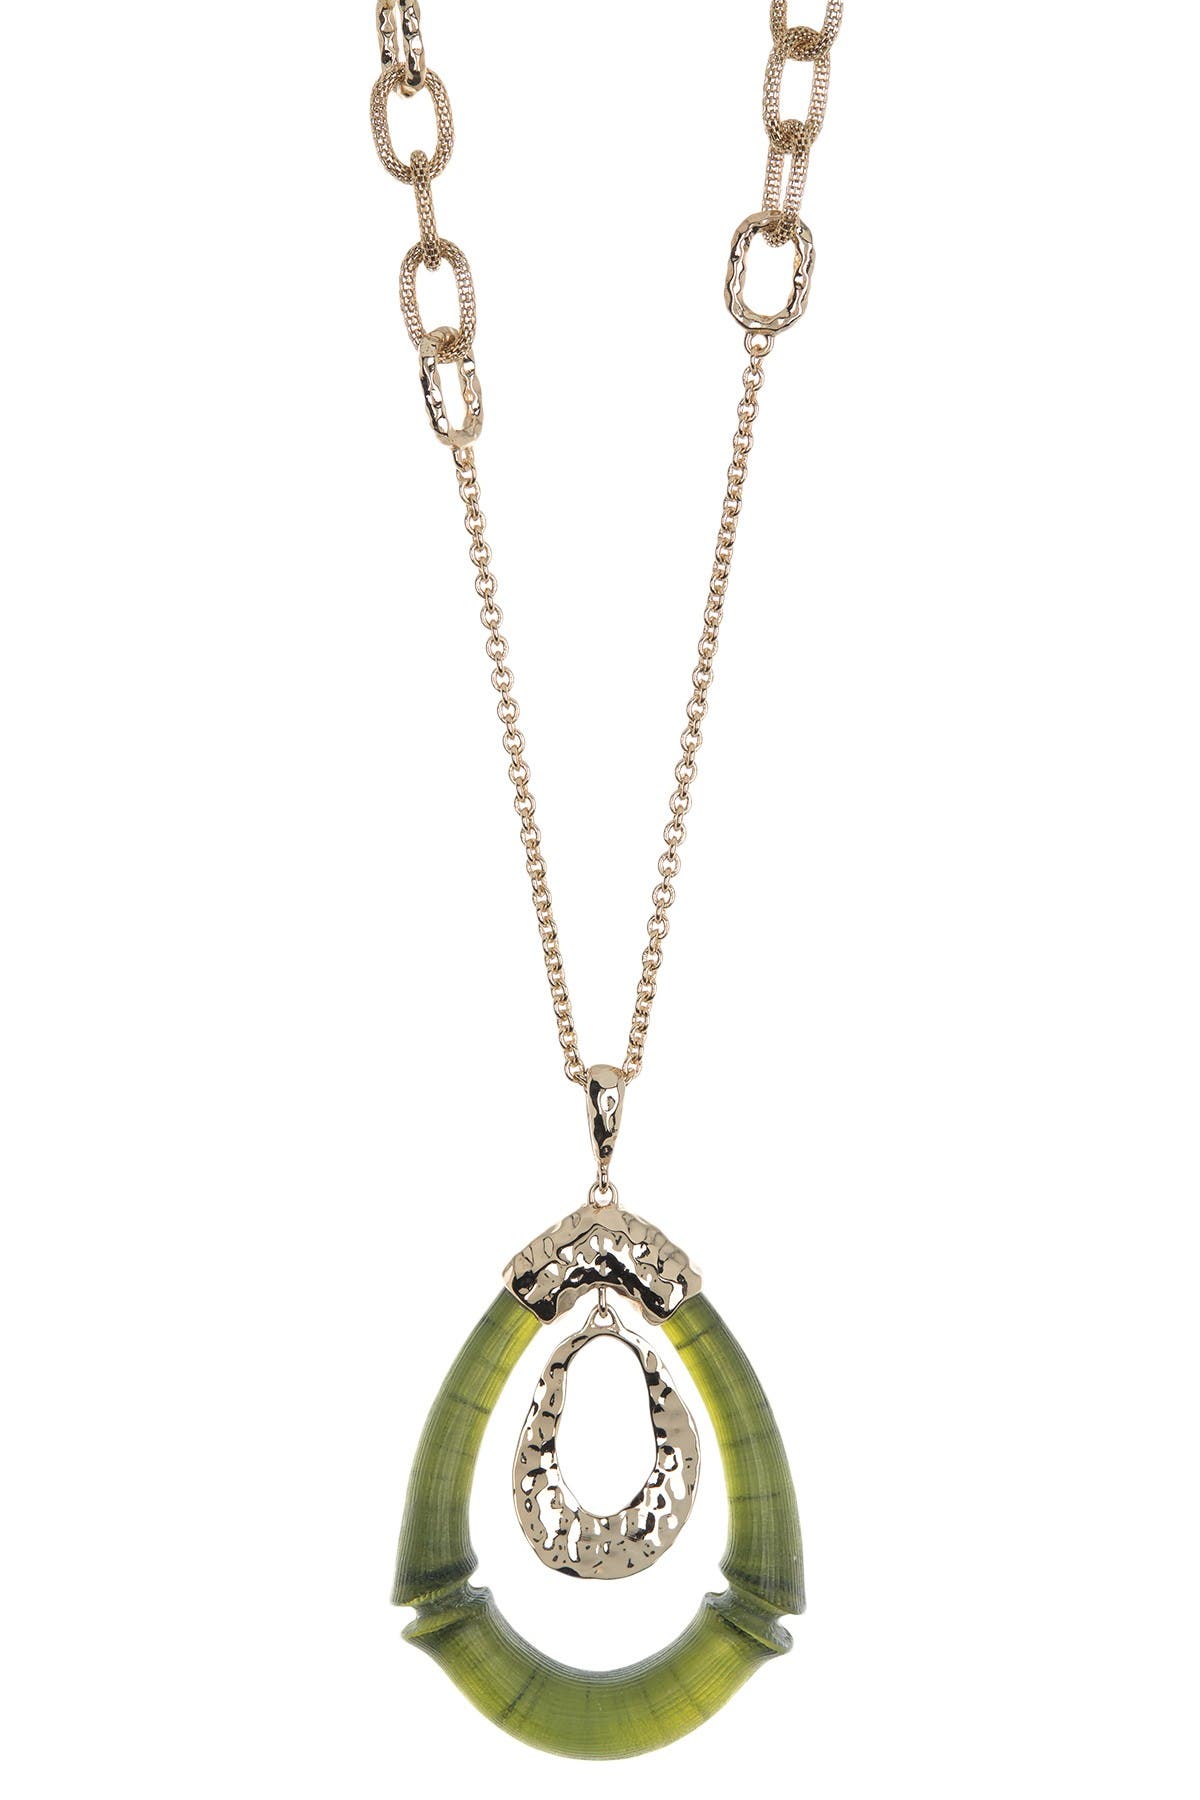 Alexis Bittar Hammered Bamboo Double Link Pendant Necklace In Grn Bmbo